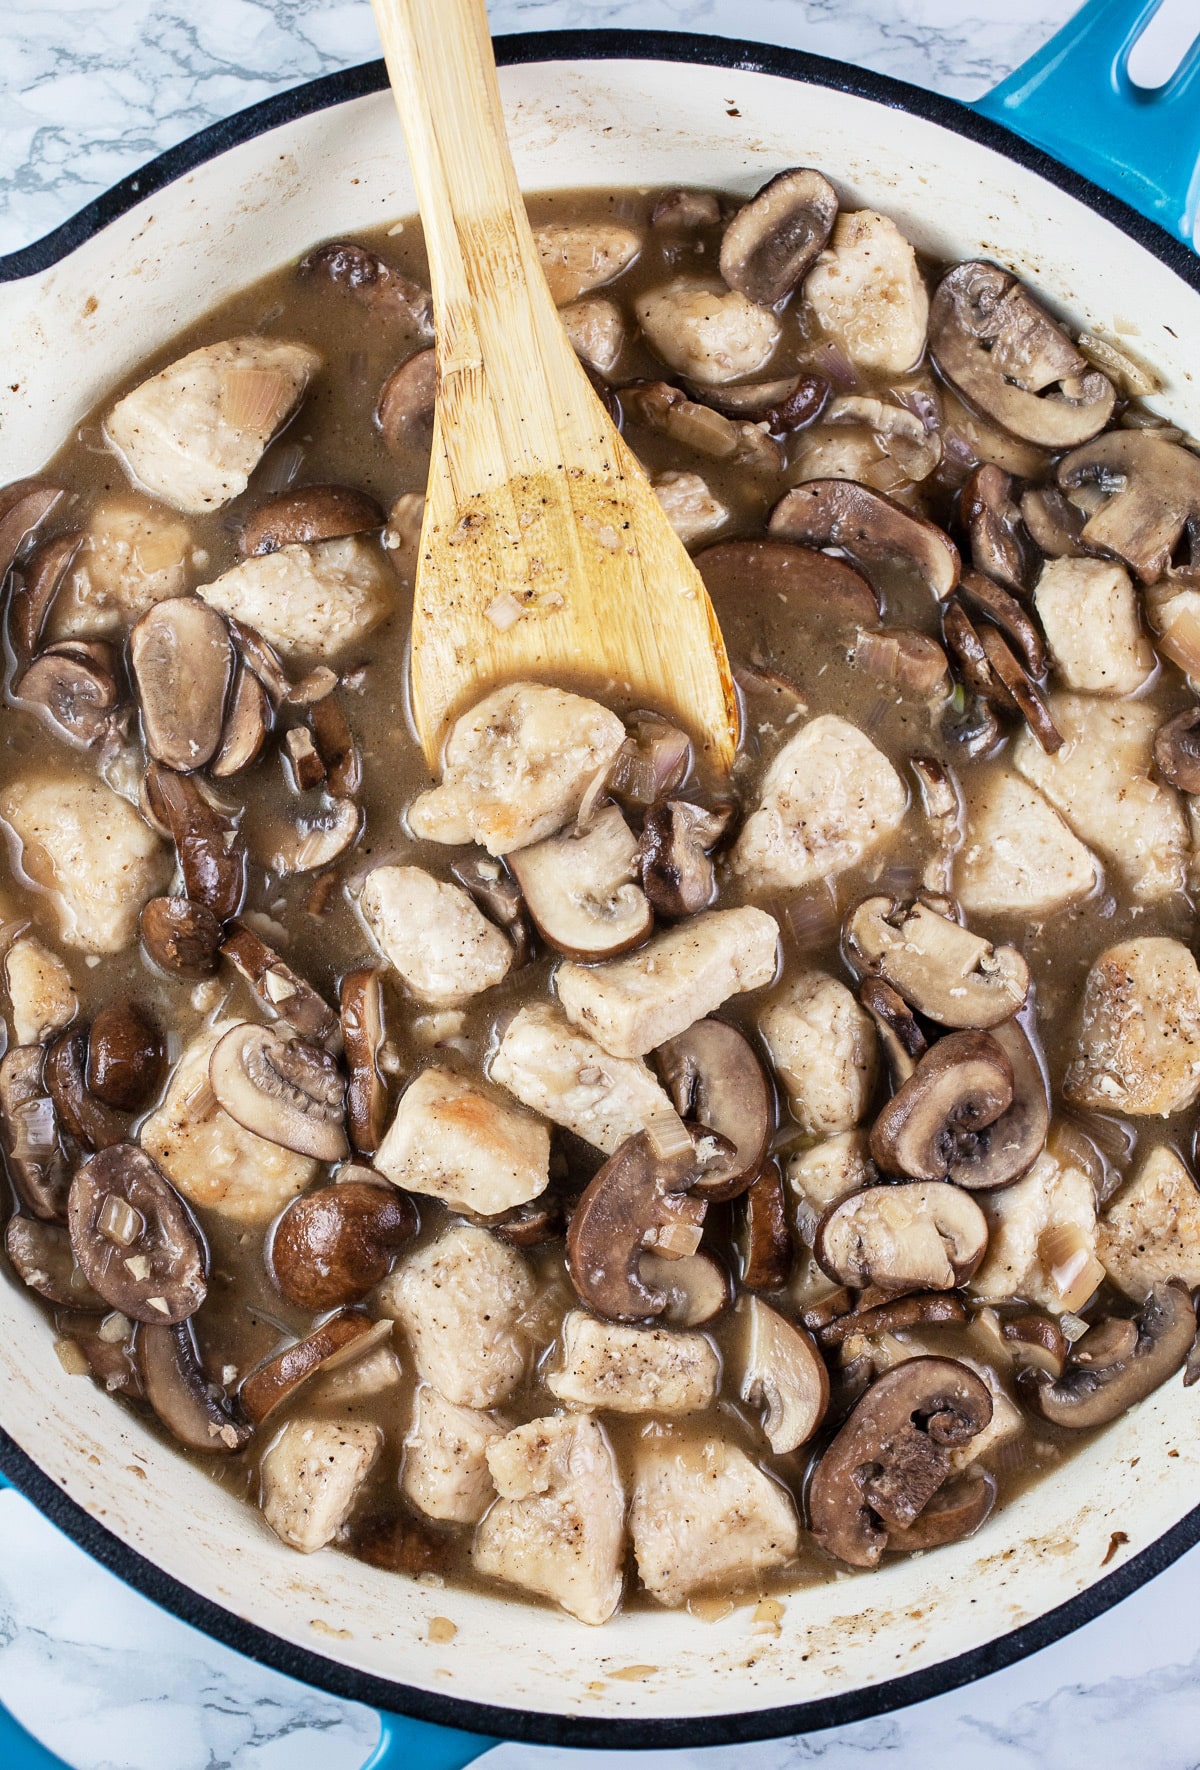 Chicken and mushrooms simmered in skillet with wooden spoon.